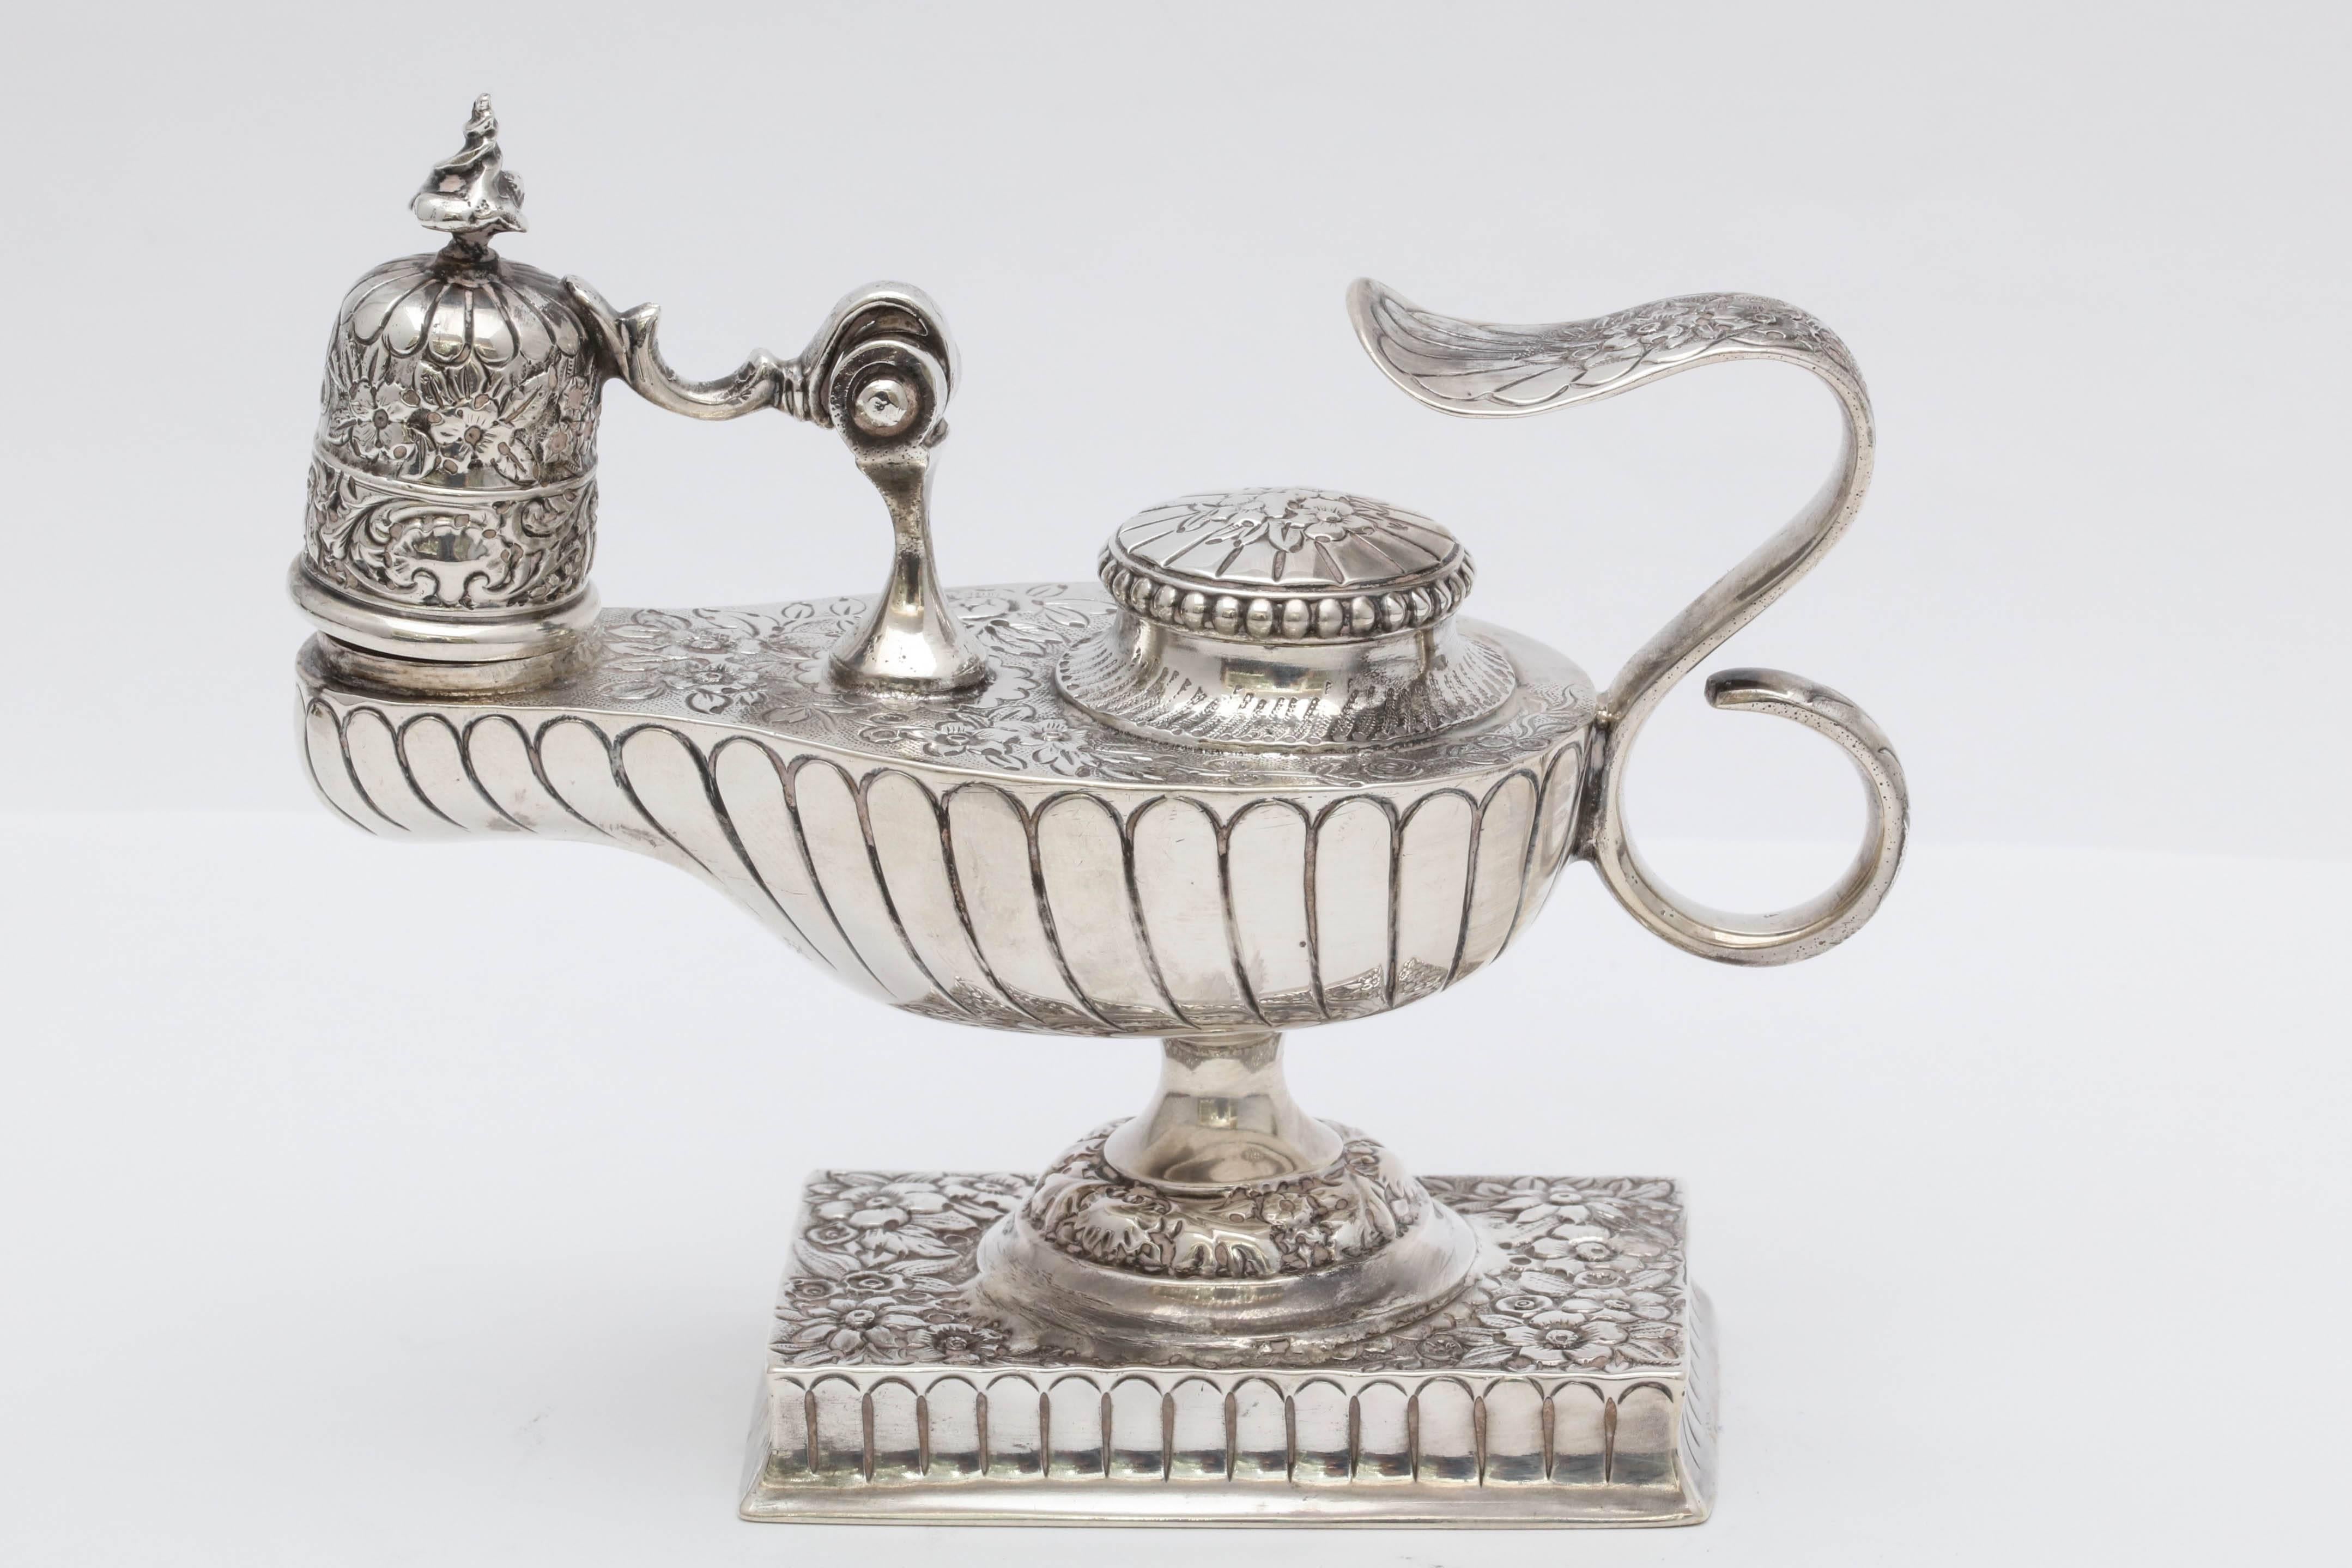 Rare and unusual, Edwardian, sterling silver, Aladdin's oil lamp - form table lighter, Chester, England, 1904, George Nathan and Ridley Hayes - makers. Lovely design; rectangular base. Hinged snuffer. Measures 4 1/2 inches wide (from tip of snuffer